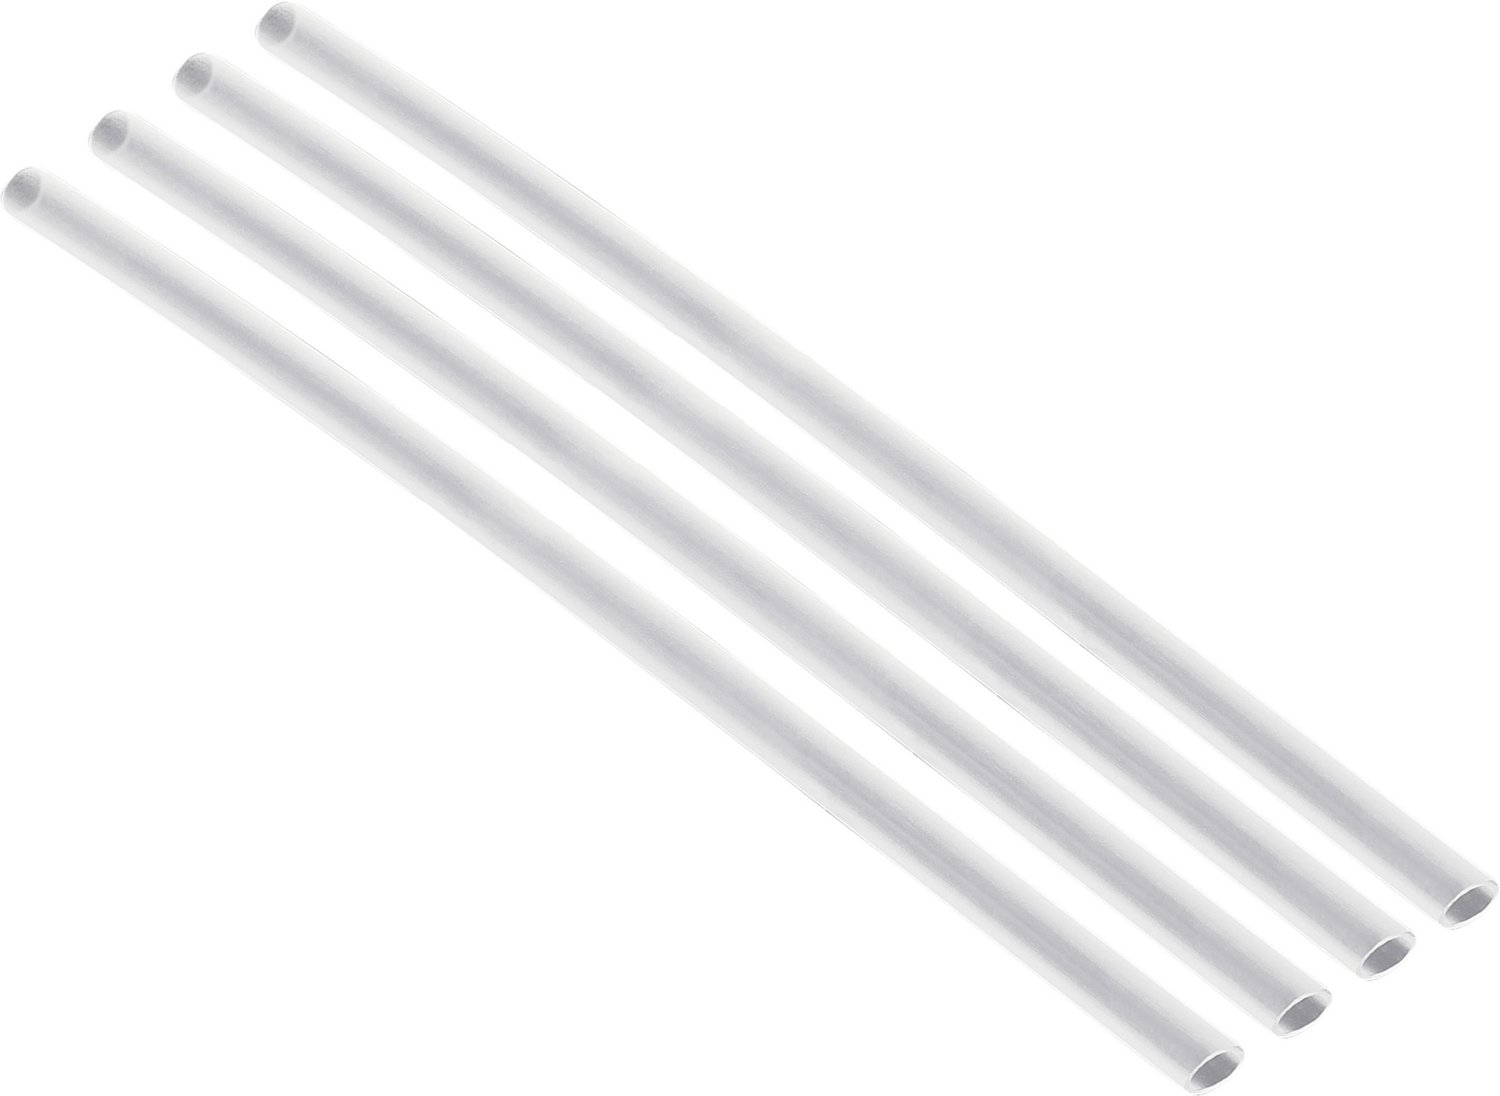 6PCS Replacement Straws Compatible with Stanley IceFlow Stainless